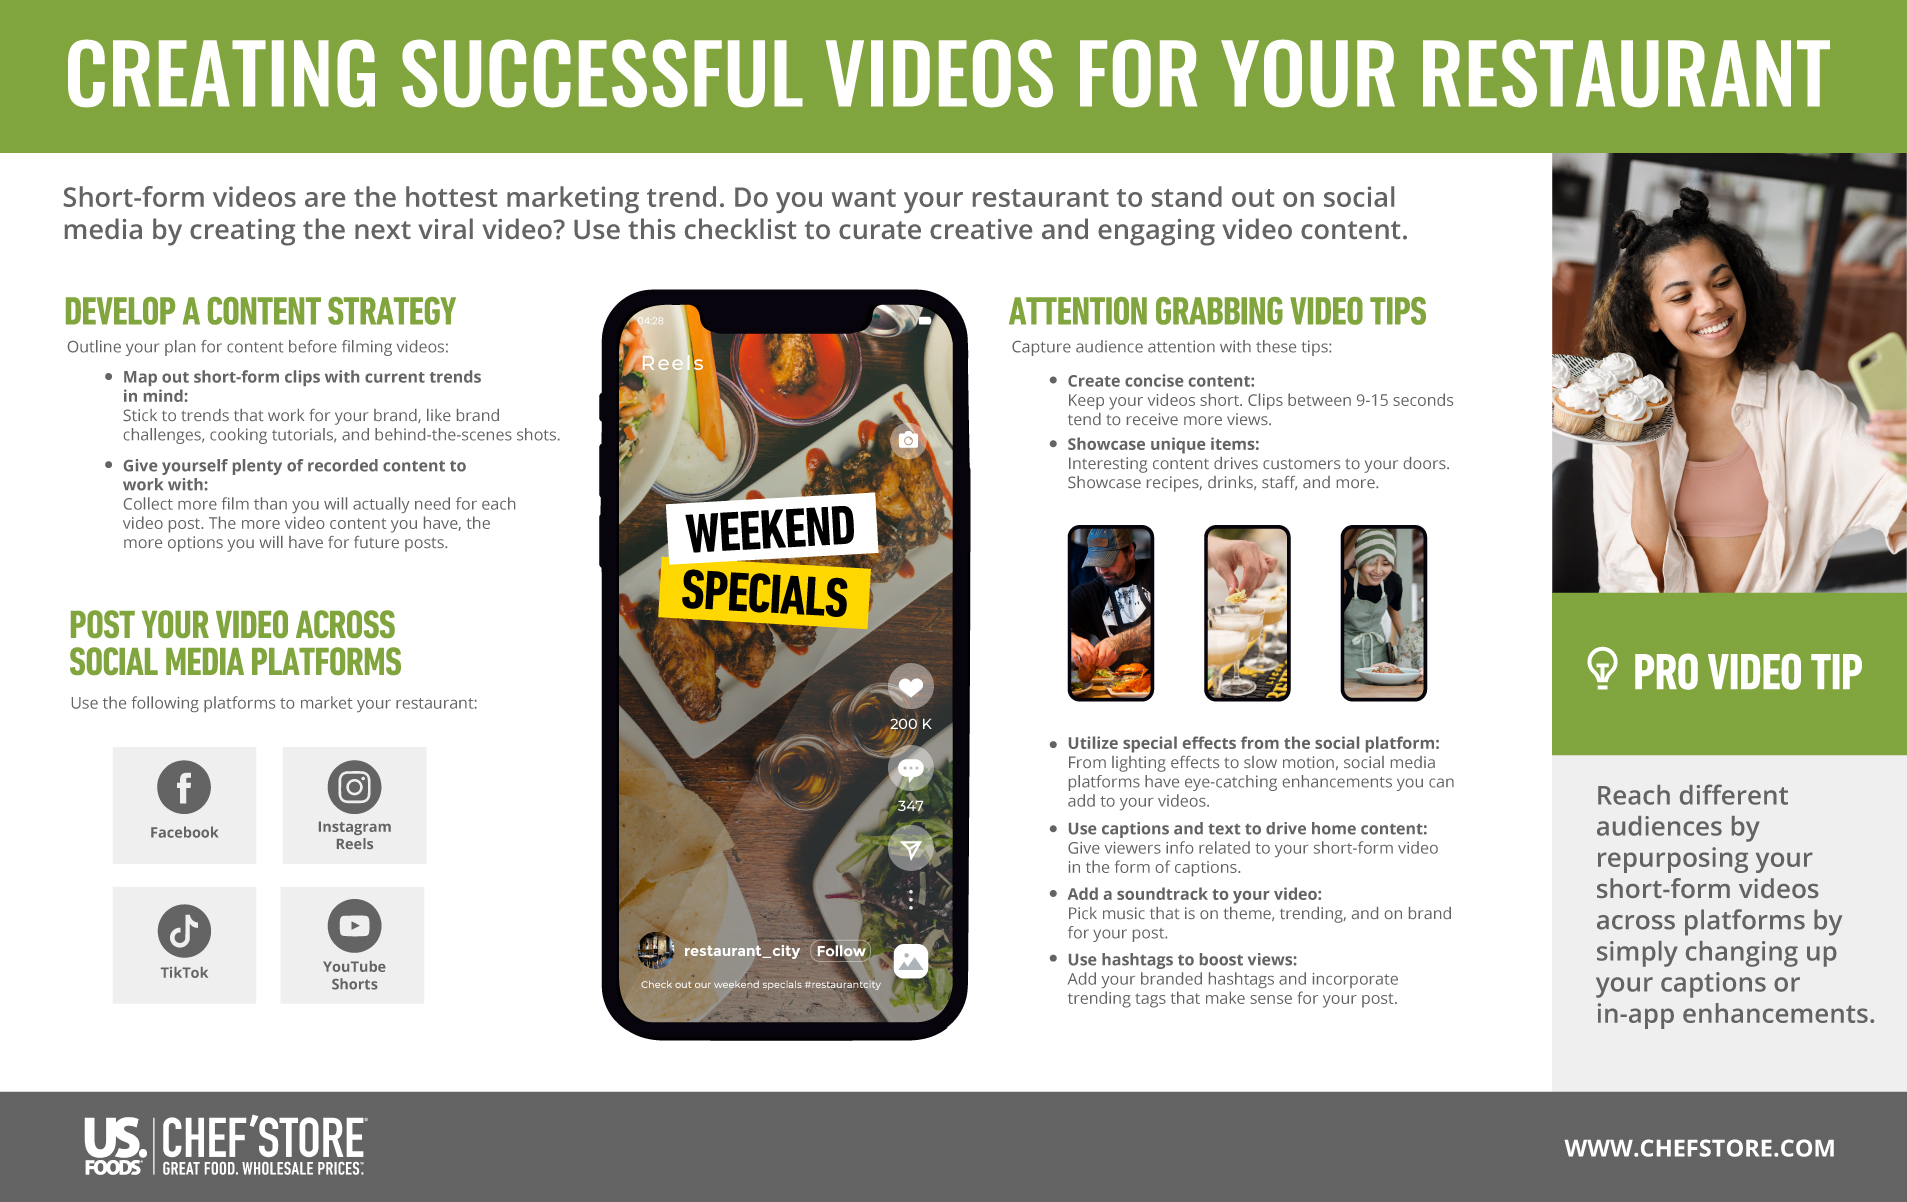 Creating Successful Videos for Your Restaurant